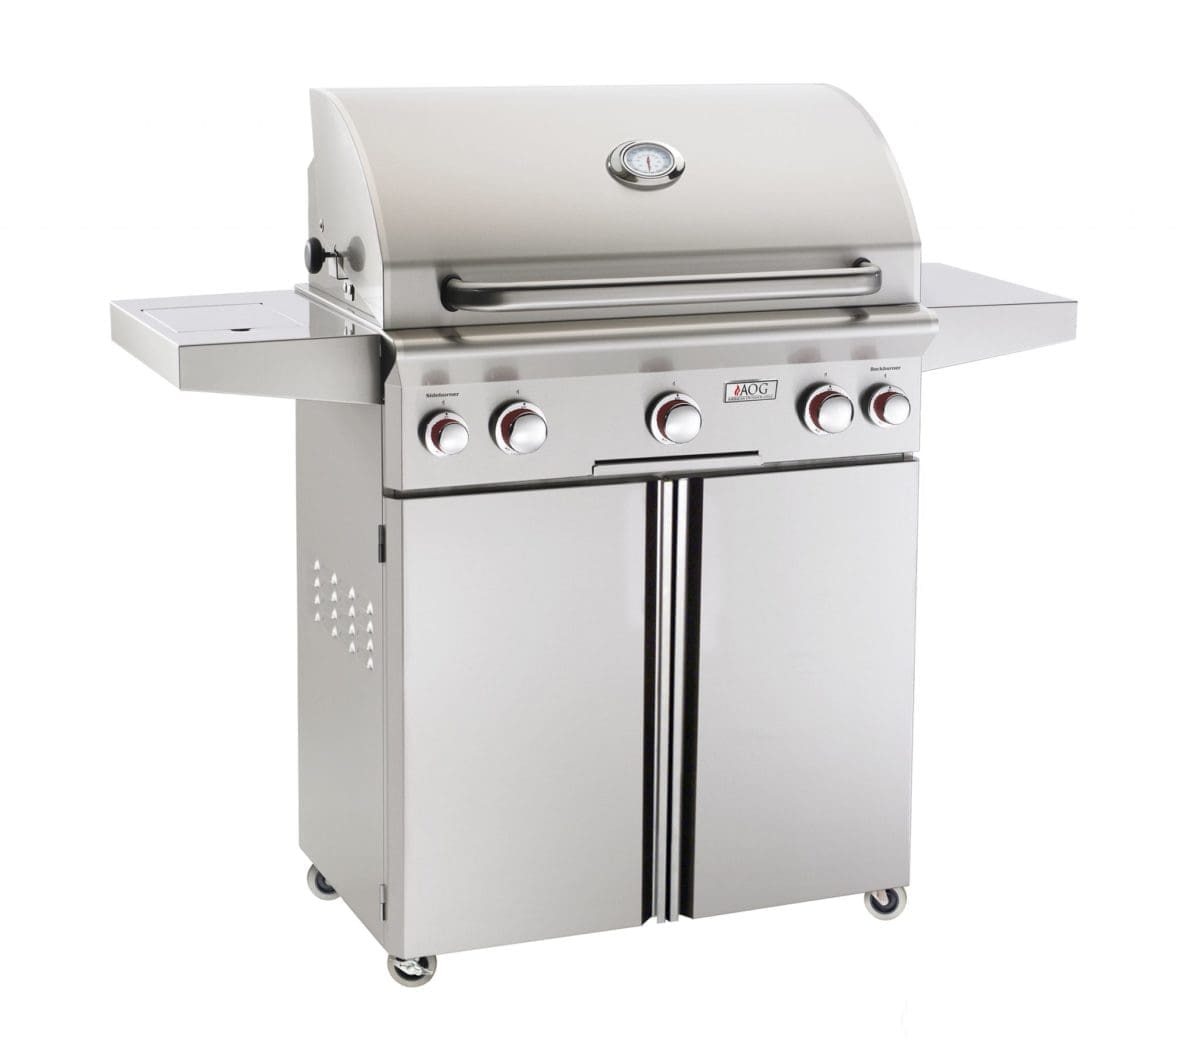 AOG 30PCT 30 T-Series Portable Grill